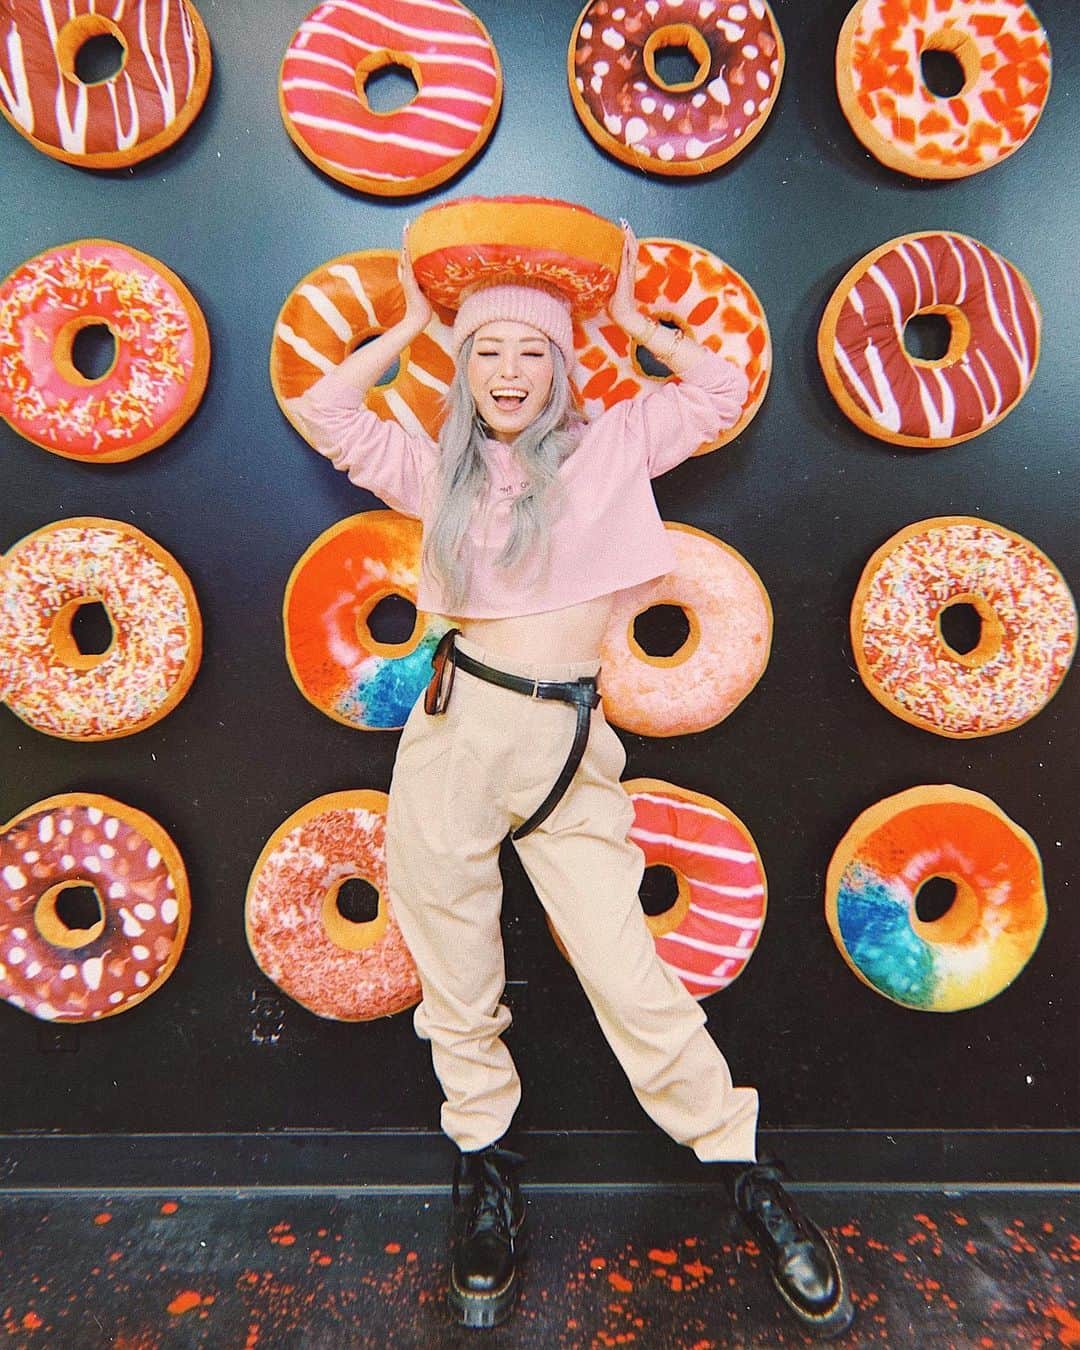 AikA♡ • 愛香 | JP Blogger • ブロガーのインスタグラム：「Happy W🍩🍩kend!! 😆 Sending you all the love and positivity today! Let’s all take a breath 💕 Stay calm 😌 Don’t spread panic & negativity because they are contagious! Spread the love, kindness and compassion babies!!!! ❤️🧡💛💚💙💜🖤🤍🤎 ( and I am sending you all my virtual HUGS! 🤗 ) ﻿ ﻿ Go watch my stories to see my silly yay-we-got-food dance 💃🕺 last night if you want a lil giggles and smile! Hehe ﻿ -﻿ #spreadpositivevibes #happyweekends #eatdonuts #smileiscontagious #happyvibes #livecolorfully #seattleselfiemuseum #drmartensstyle」